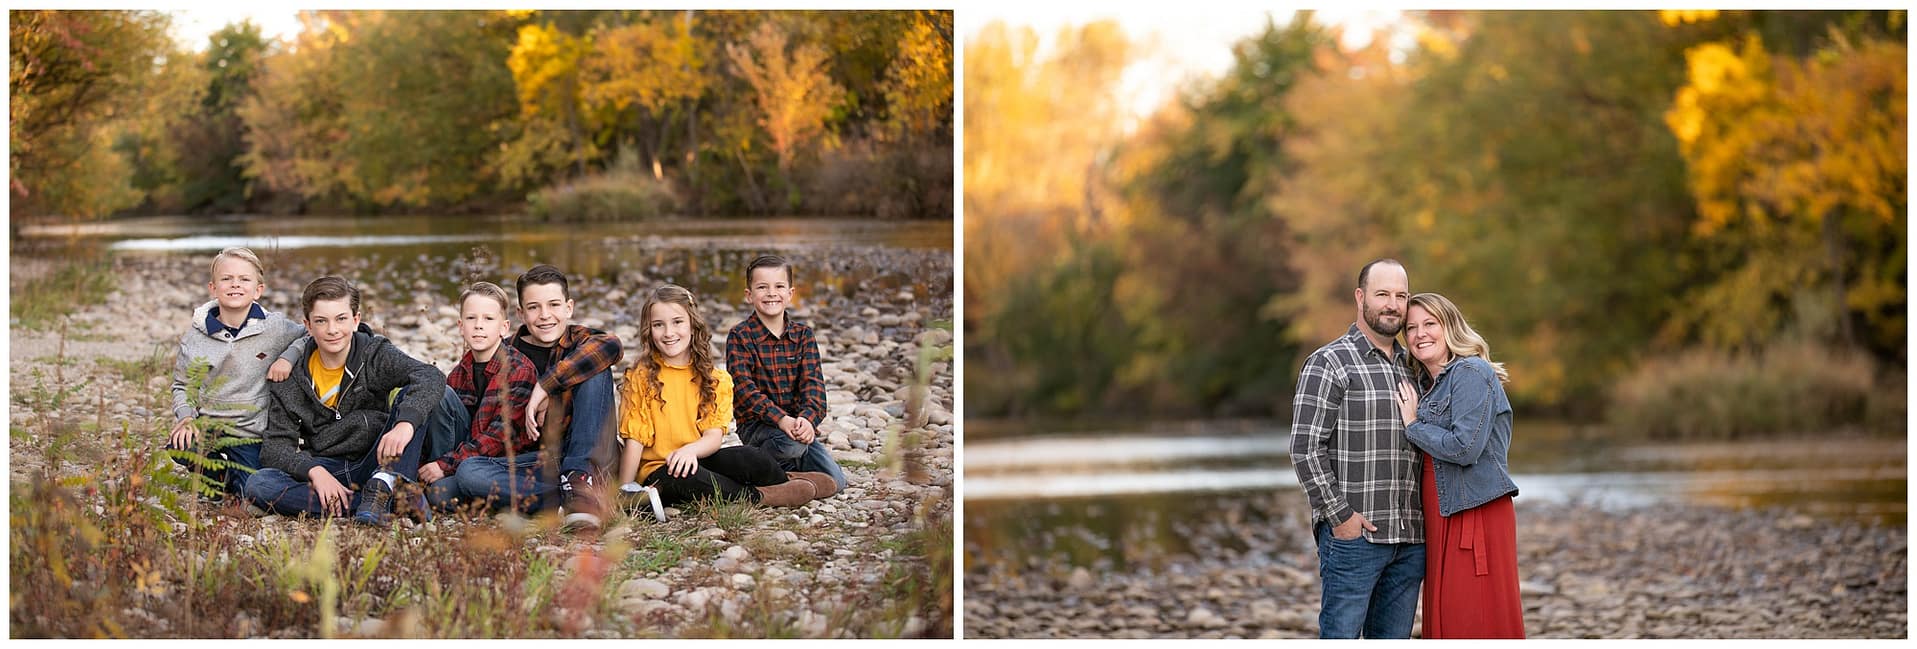 Six children in group photograph at the Boise River. Photos by Tiffany Hix Photography.